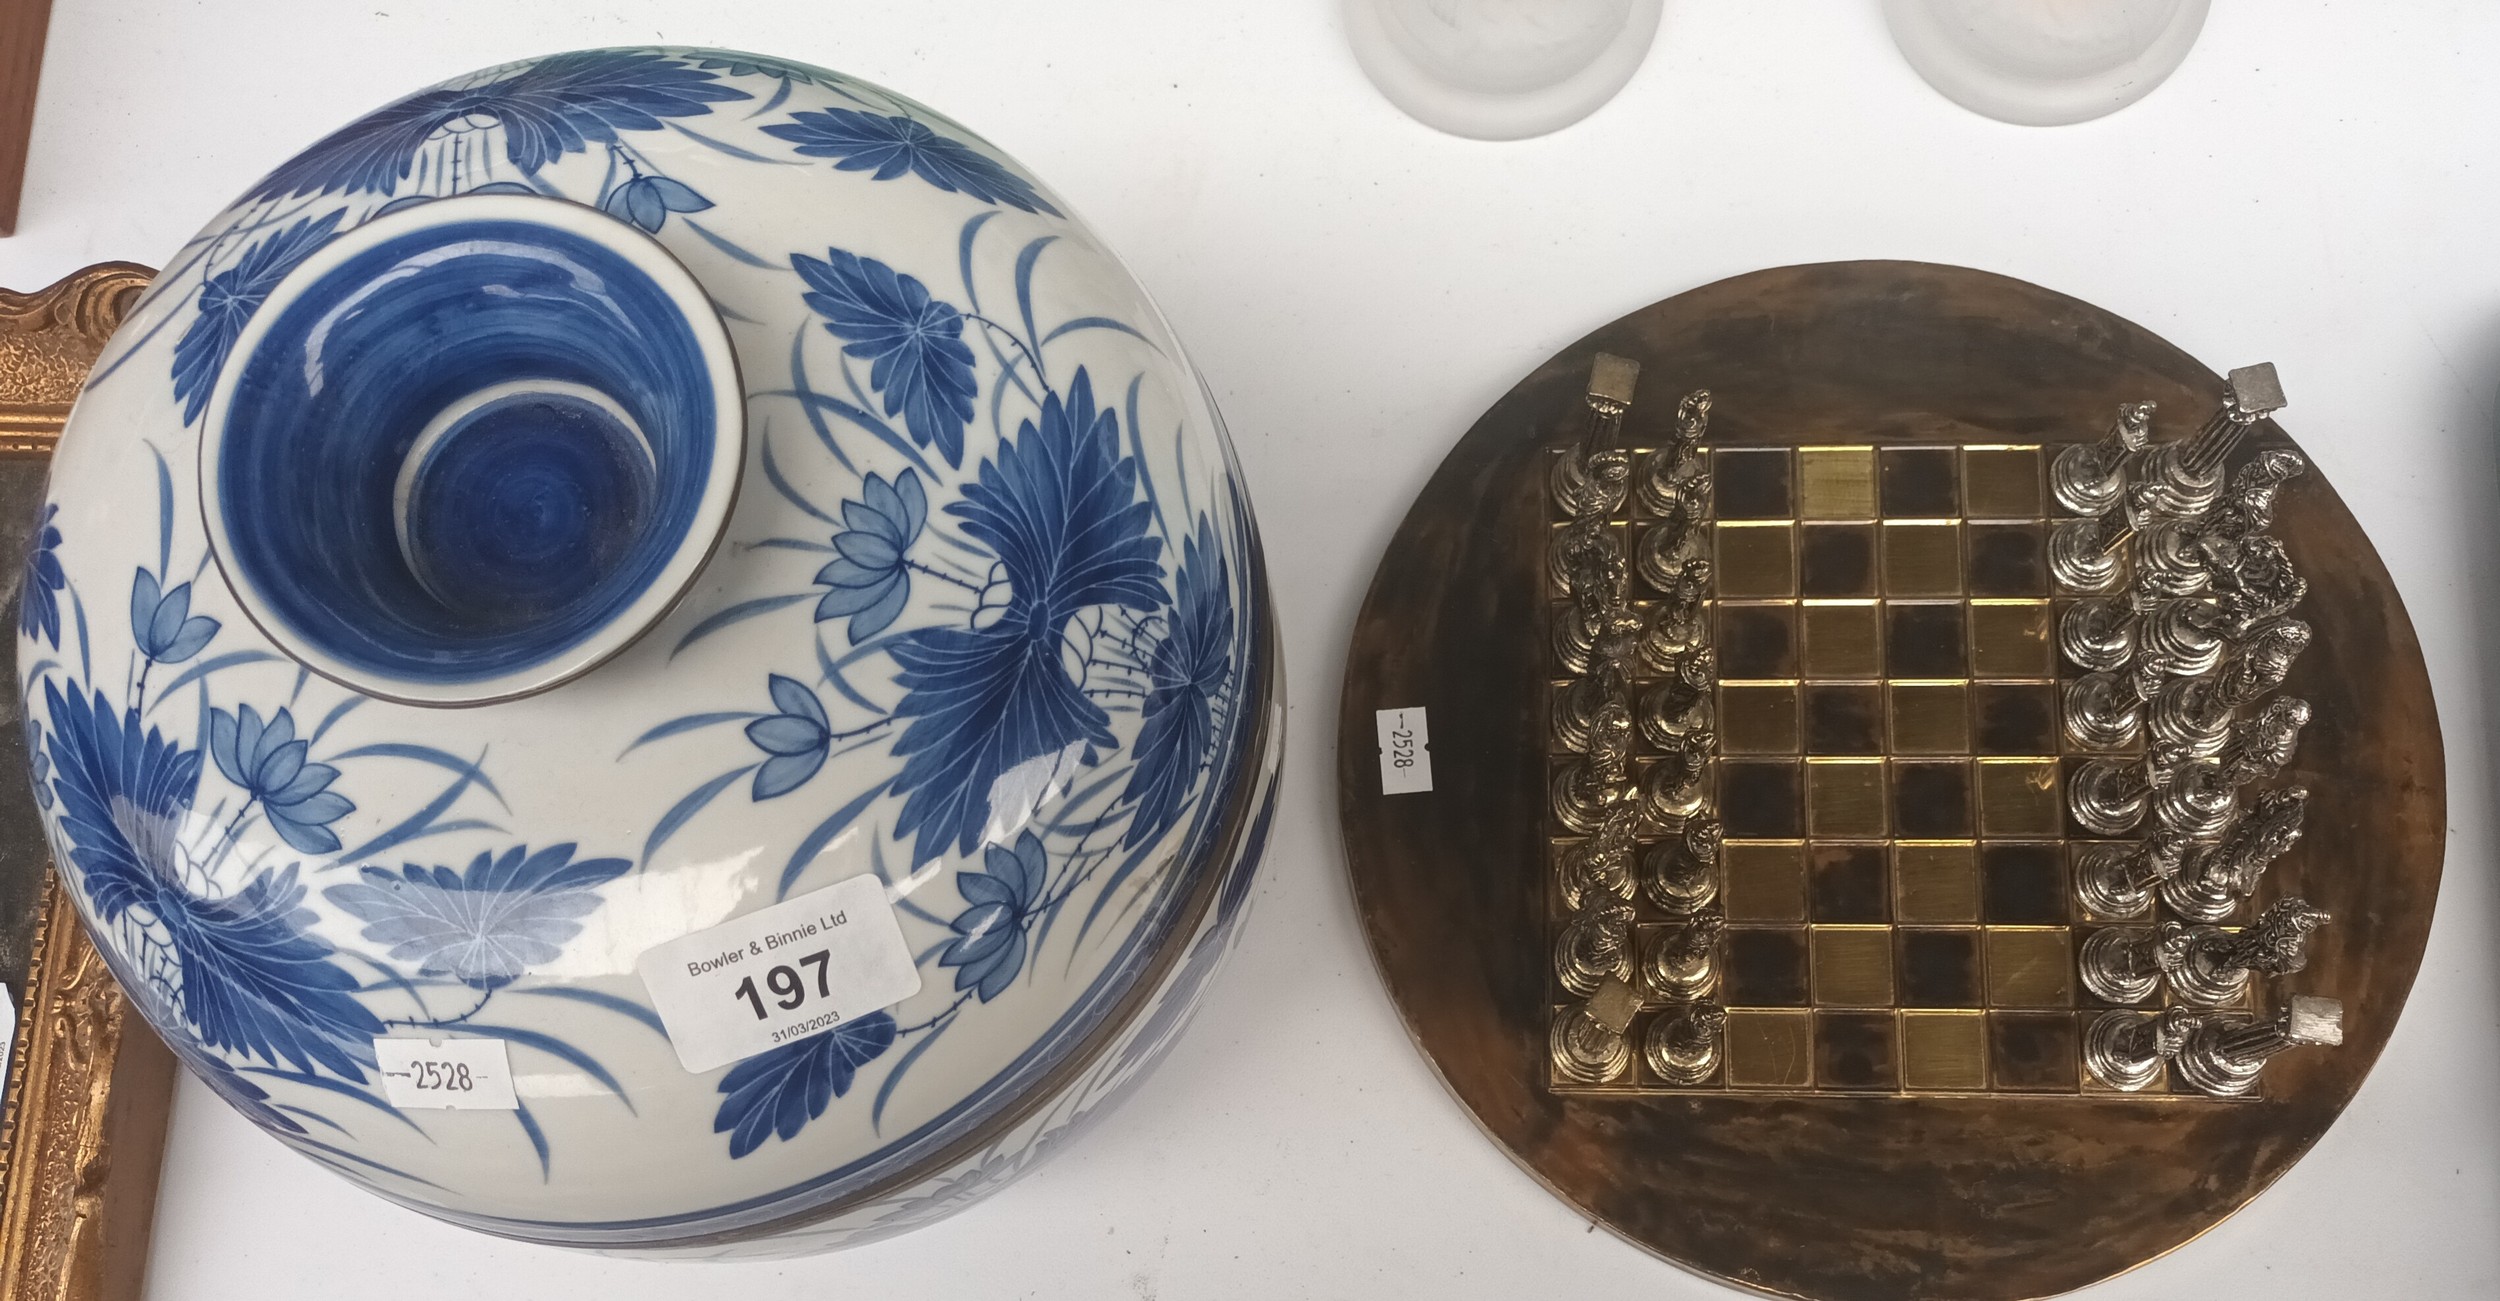 A Ornate Metal chess set with board along with A Large eastern themed blue & white preserve dish - Image 2 of 3